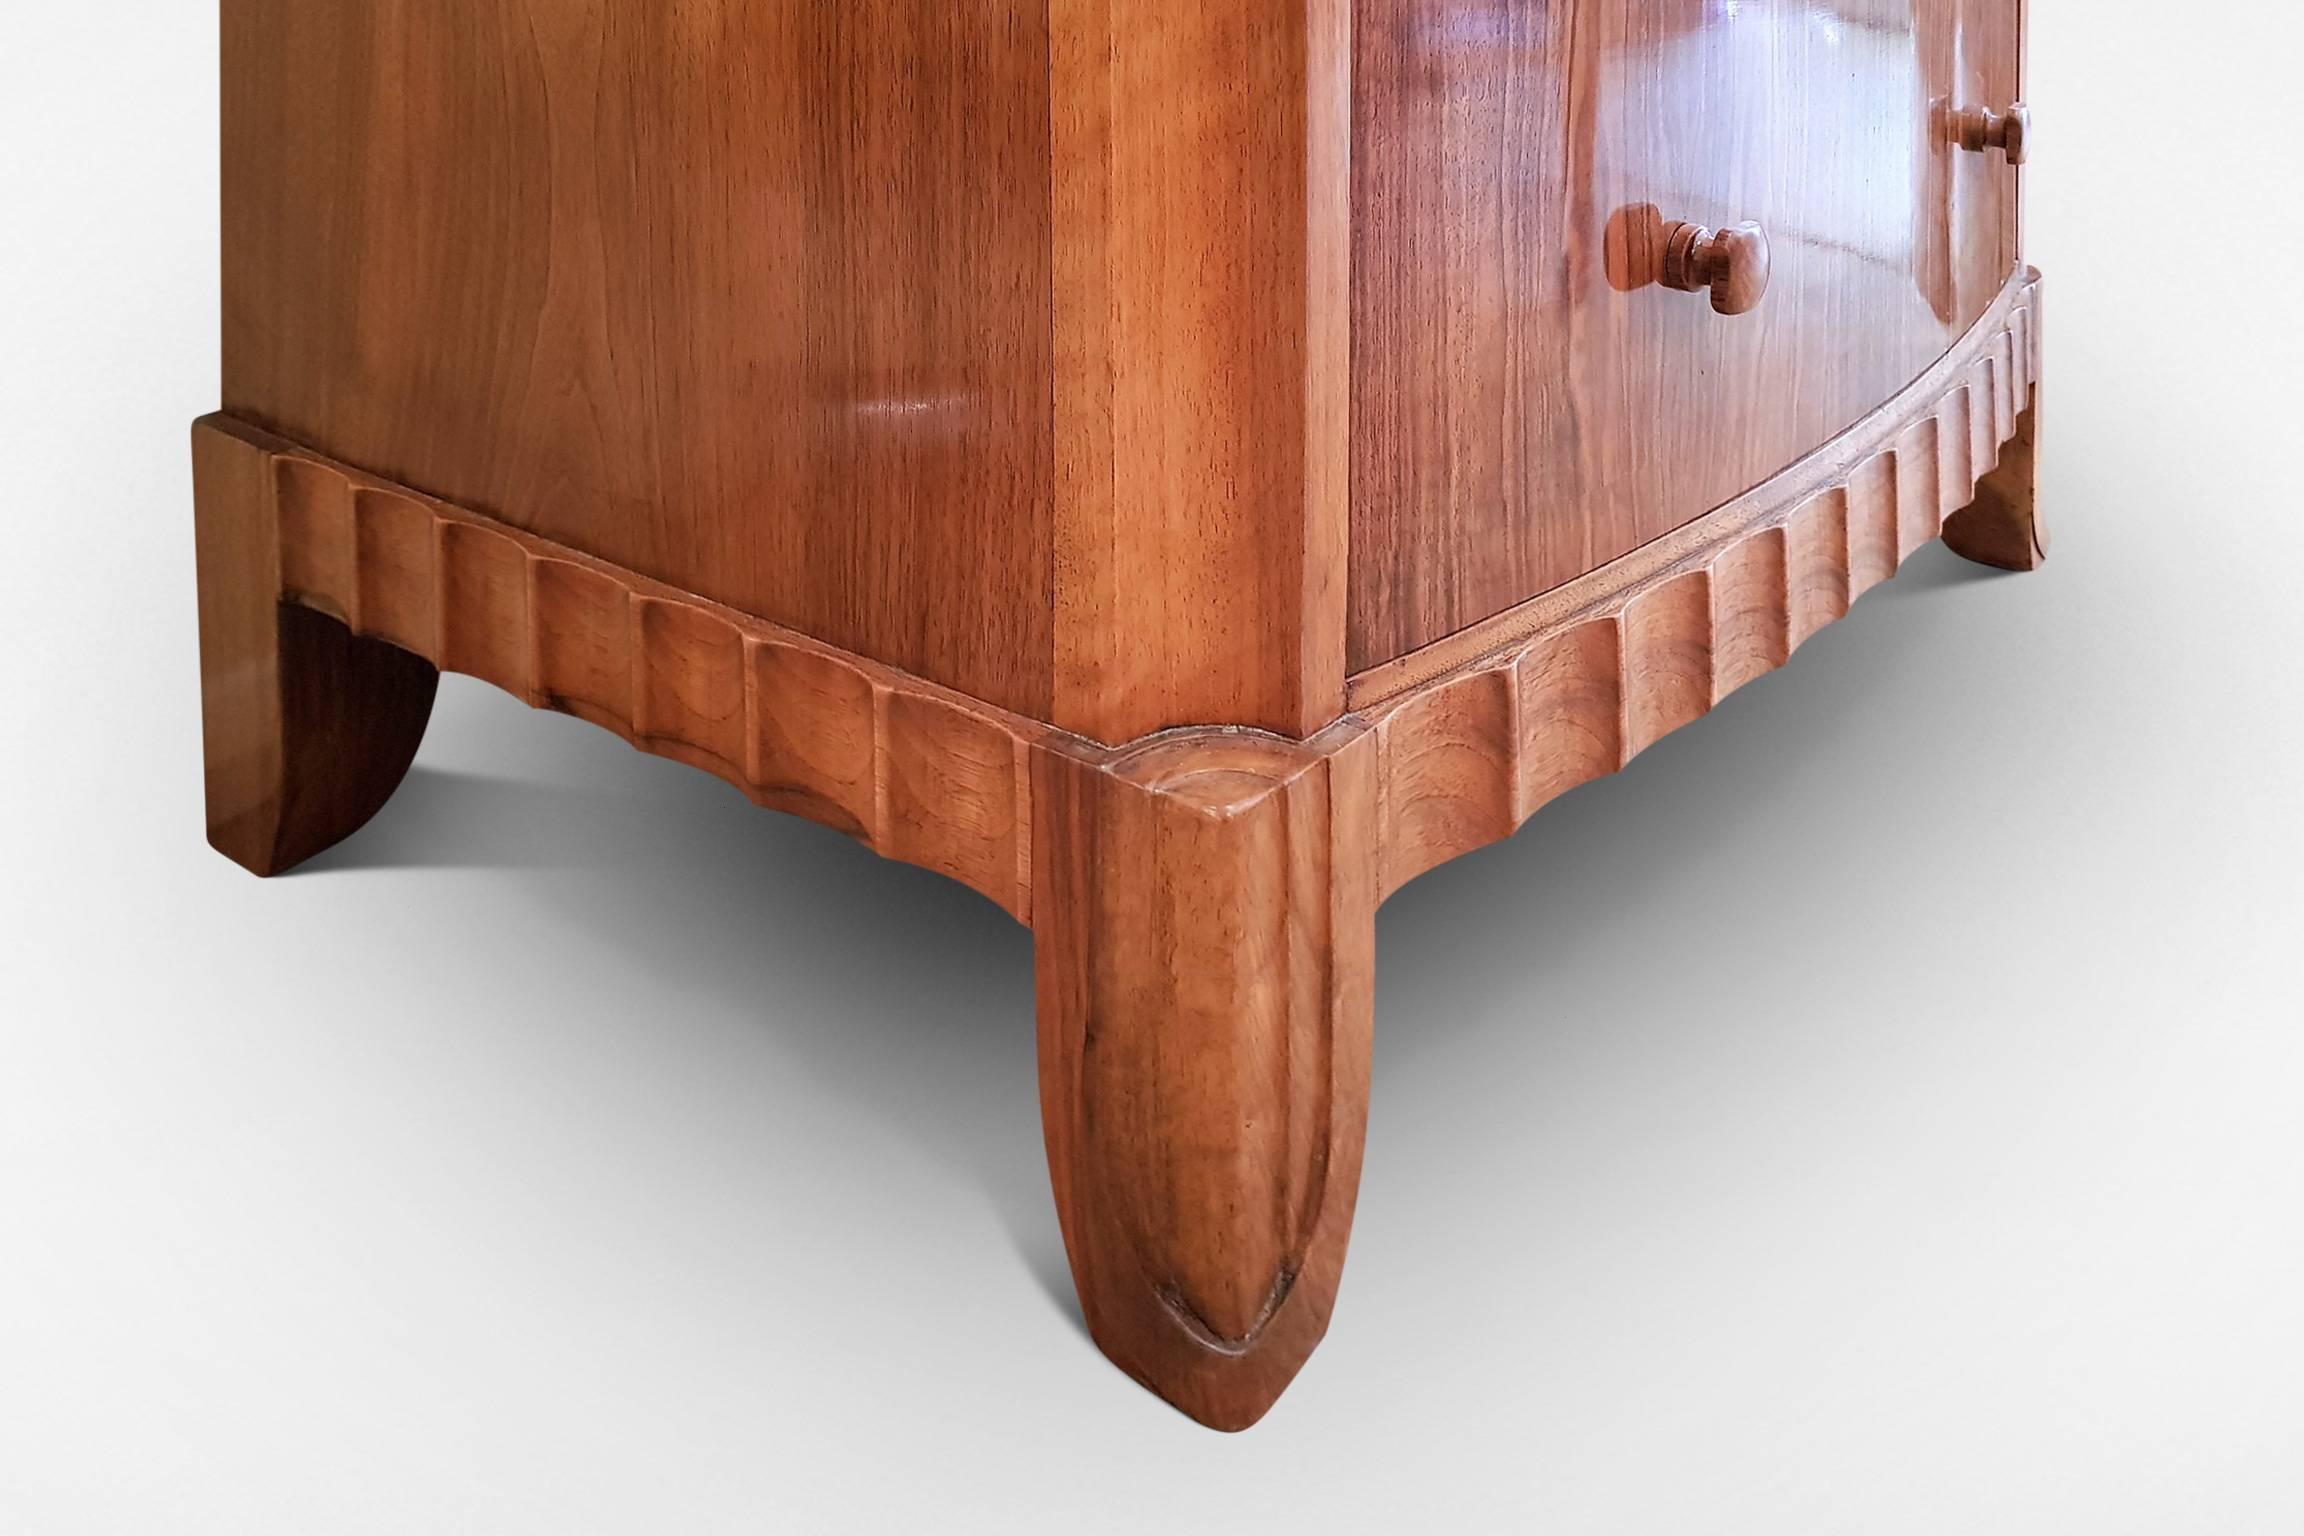 20th Century Art Deco Walnut Tallboy Chest with Cupboard over Attributed to Serge Chermayeff